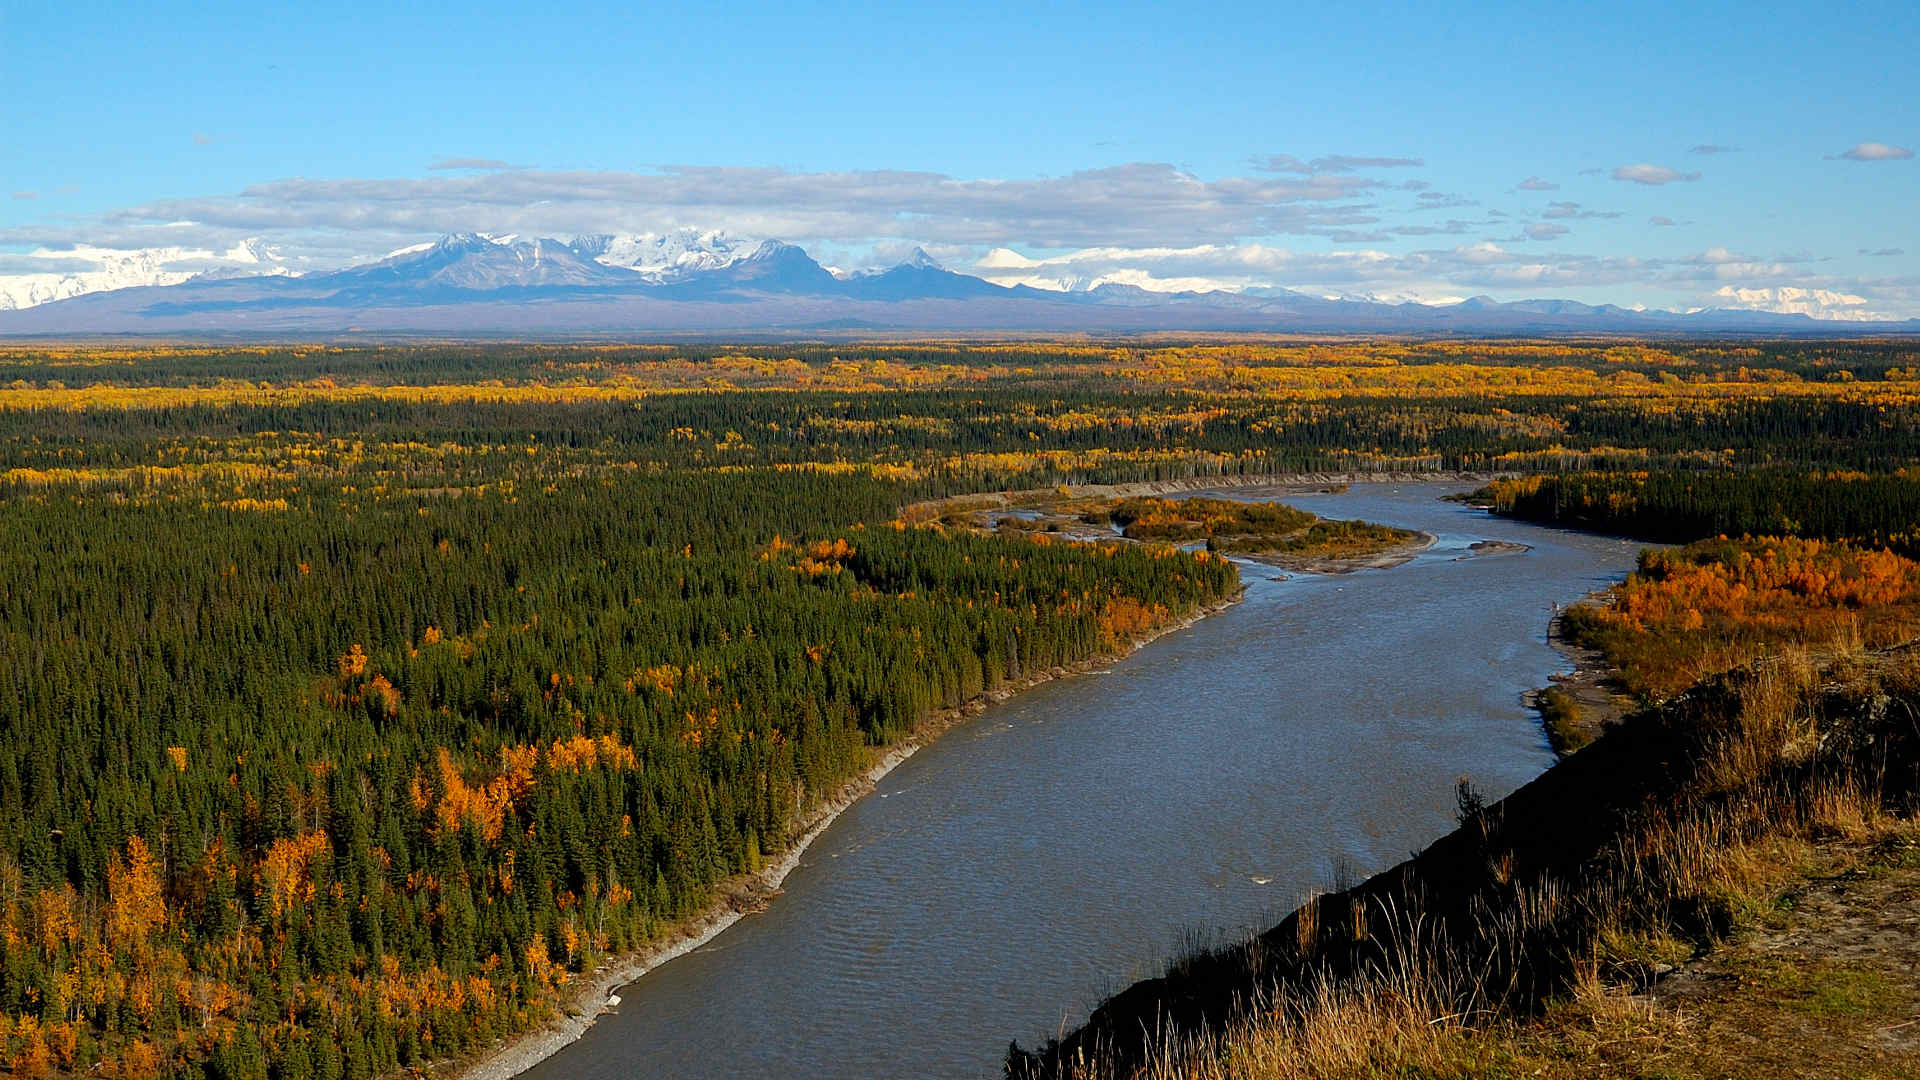 A view of the Copper River in the Wrangell-St. Elias National Park and Preserve. For generations, Native Alaskans have lived off the land in the Copper River Valley.